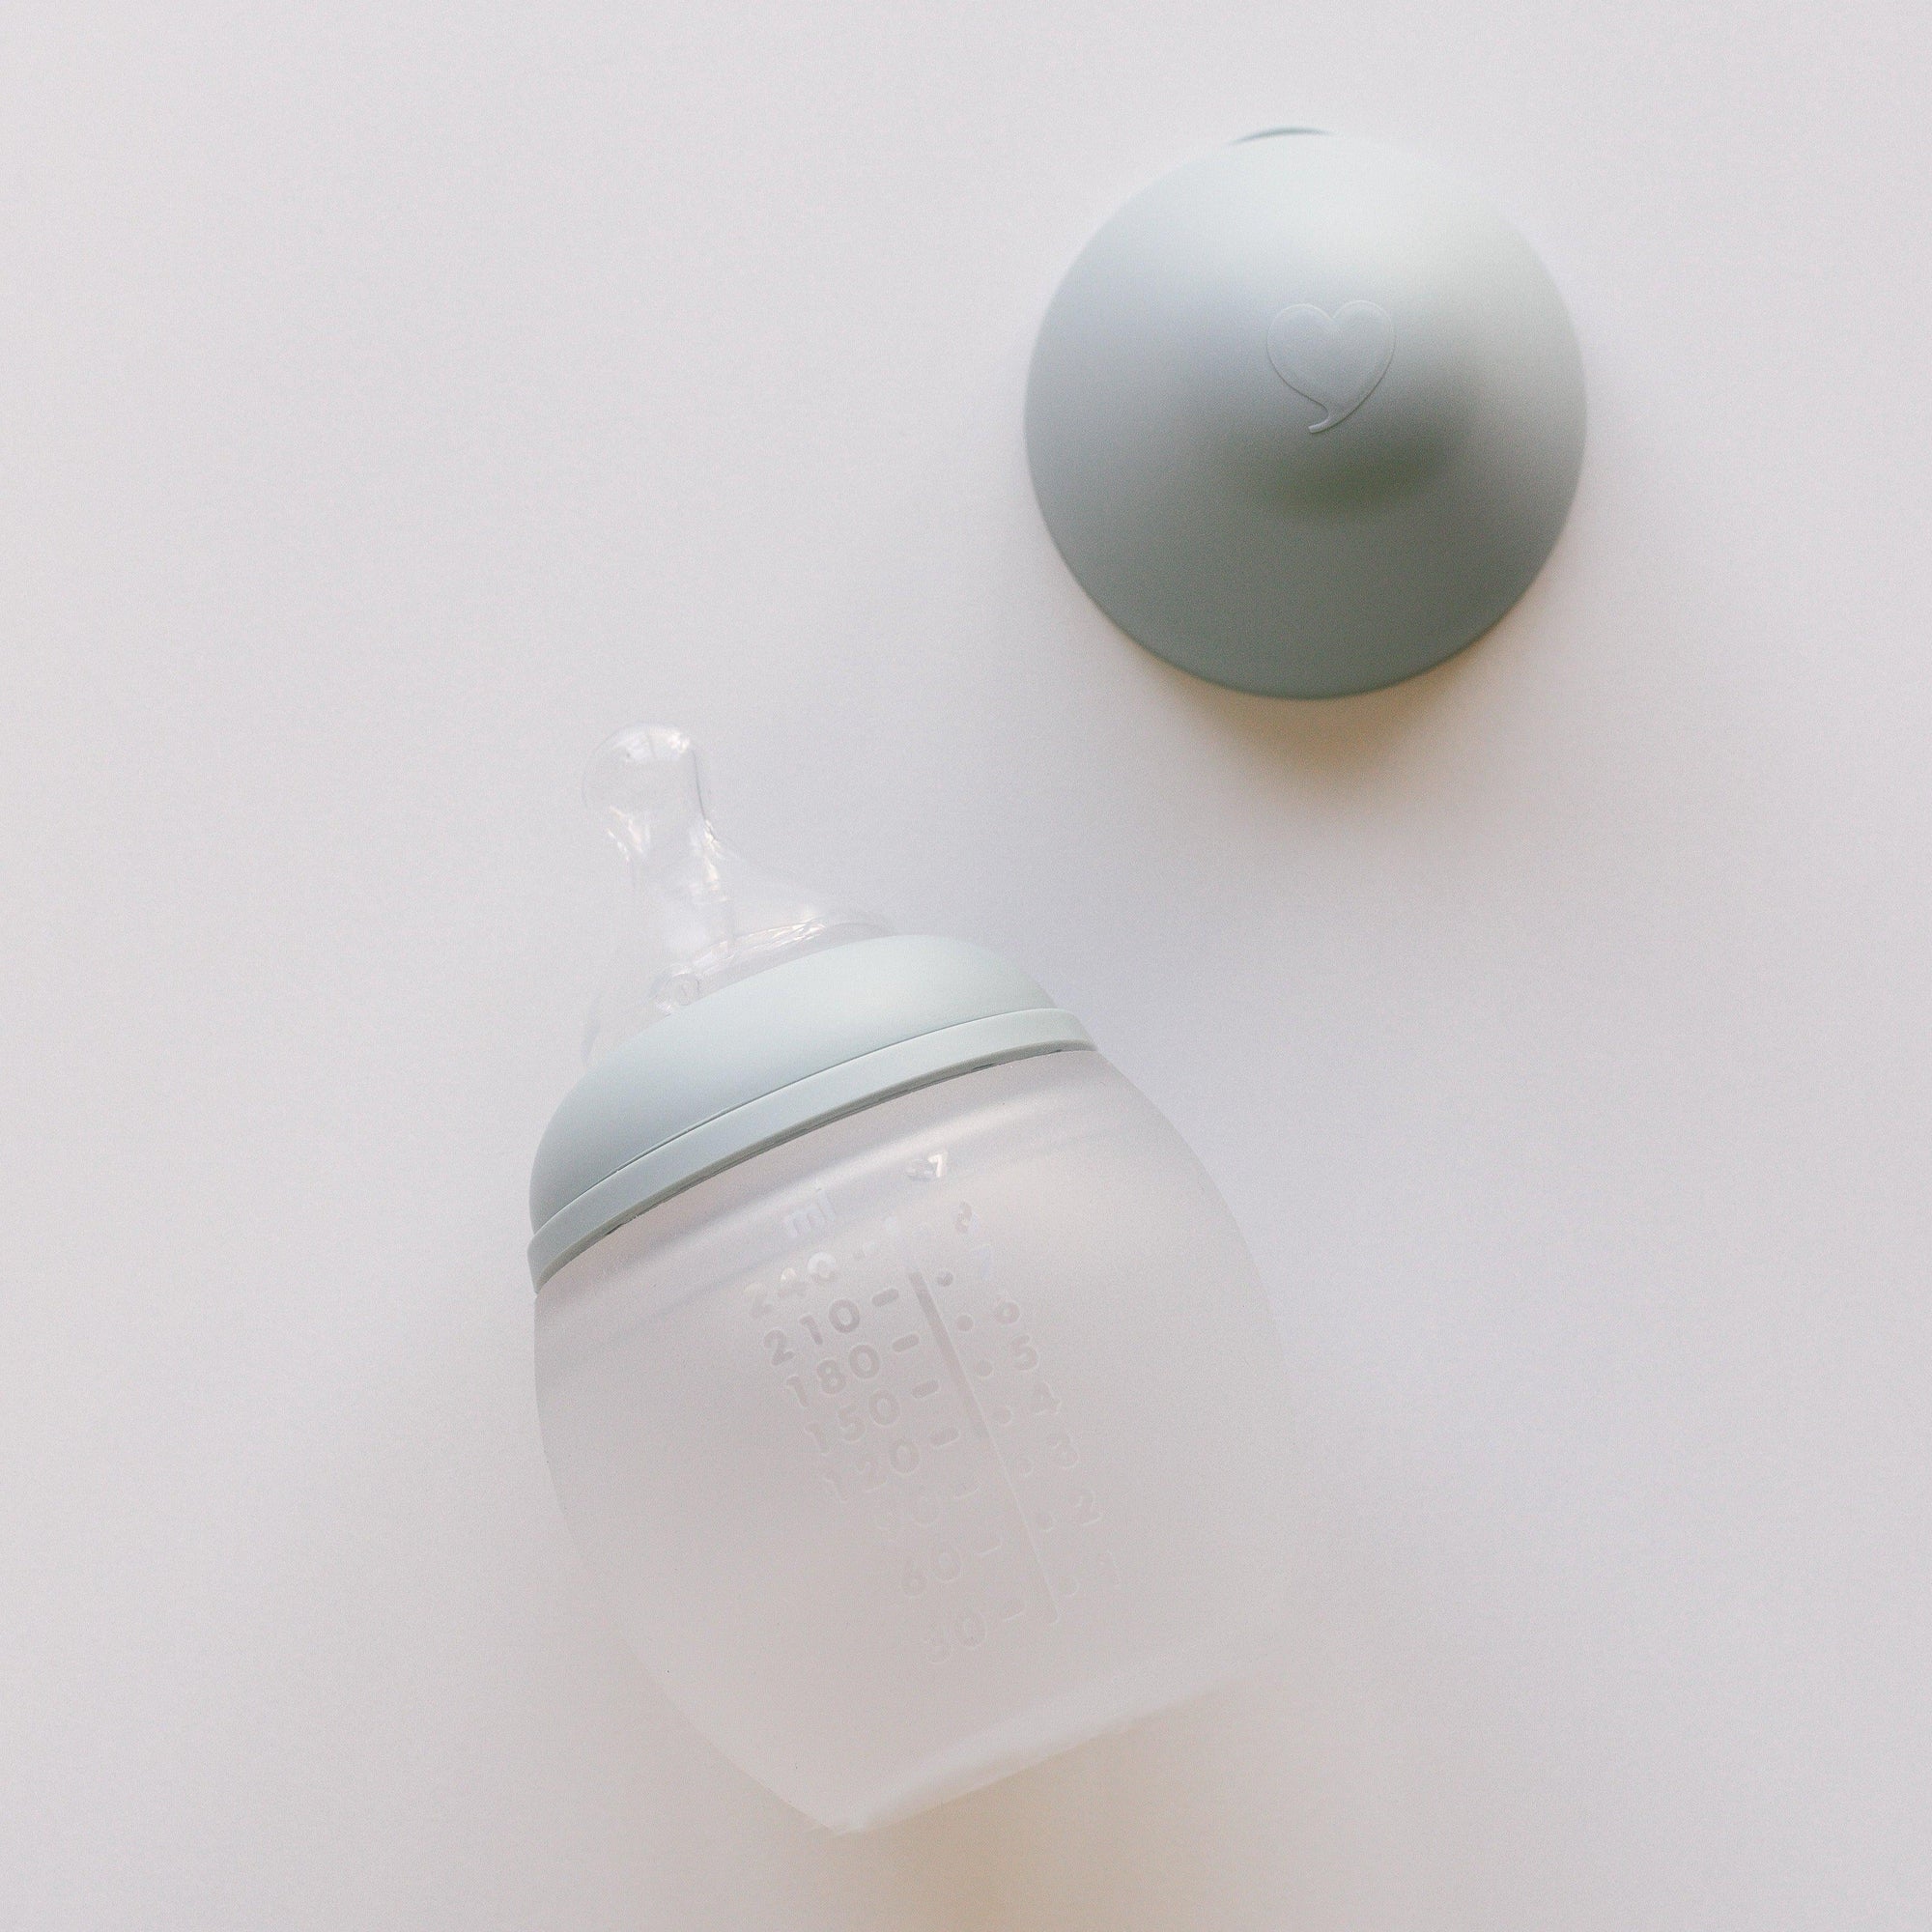 An Elhée France BibRond ivy green baby bottle on a white surface.